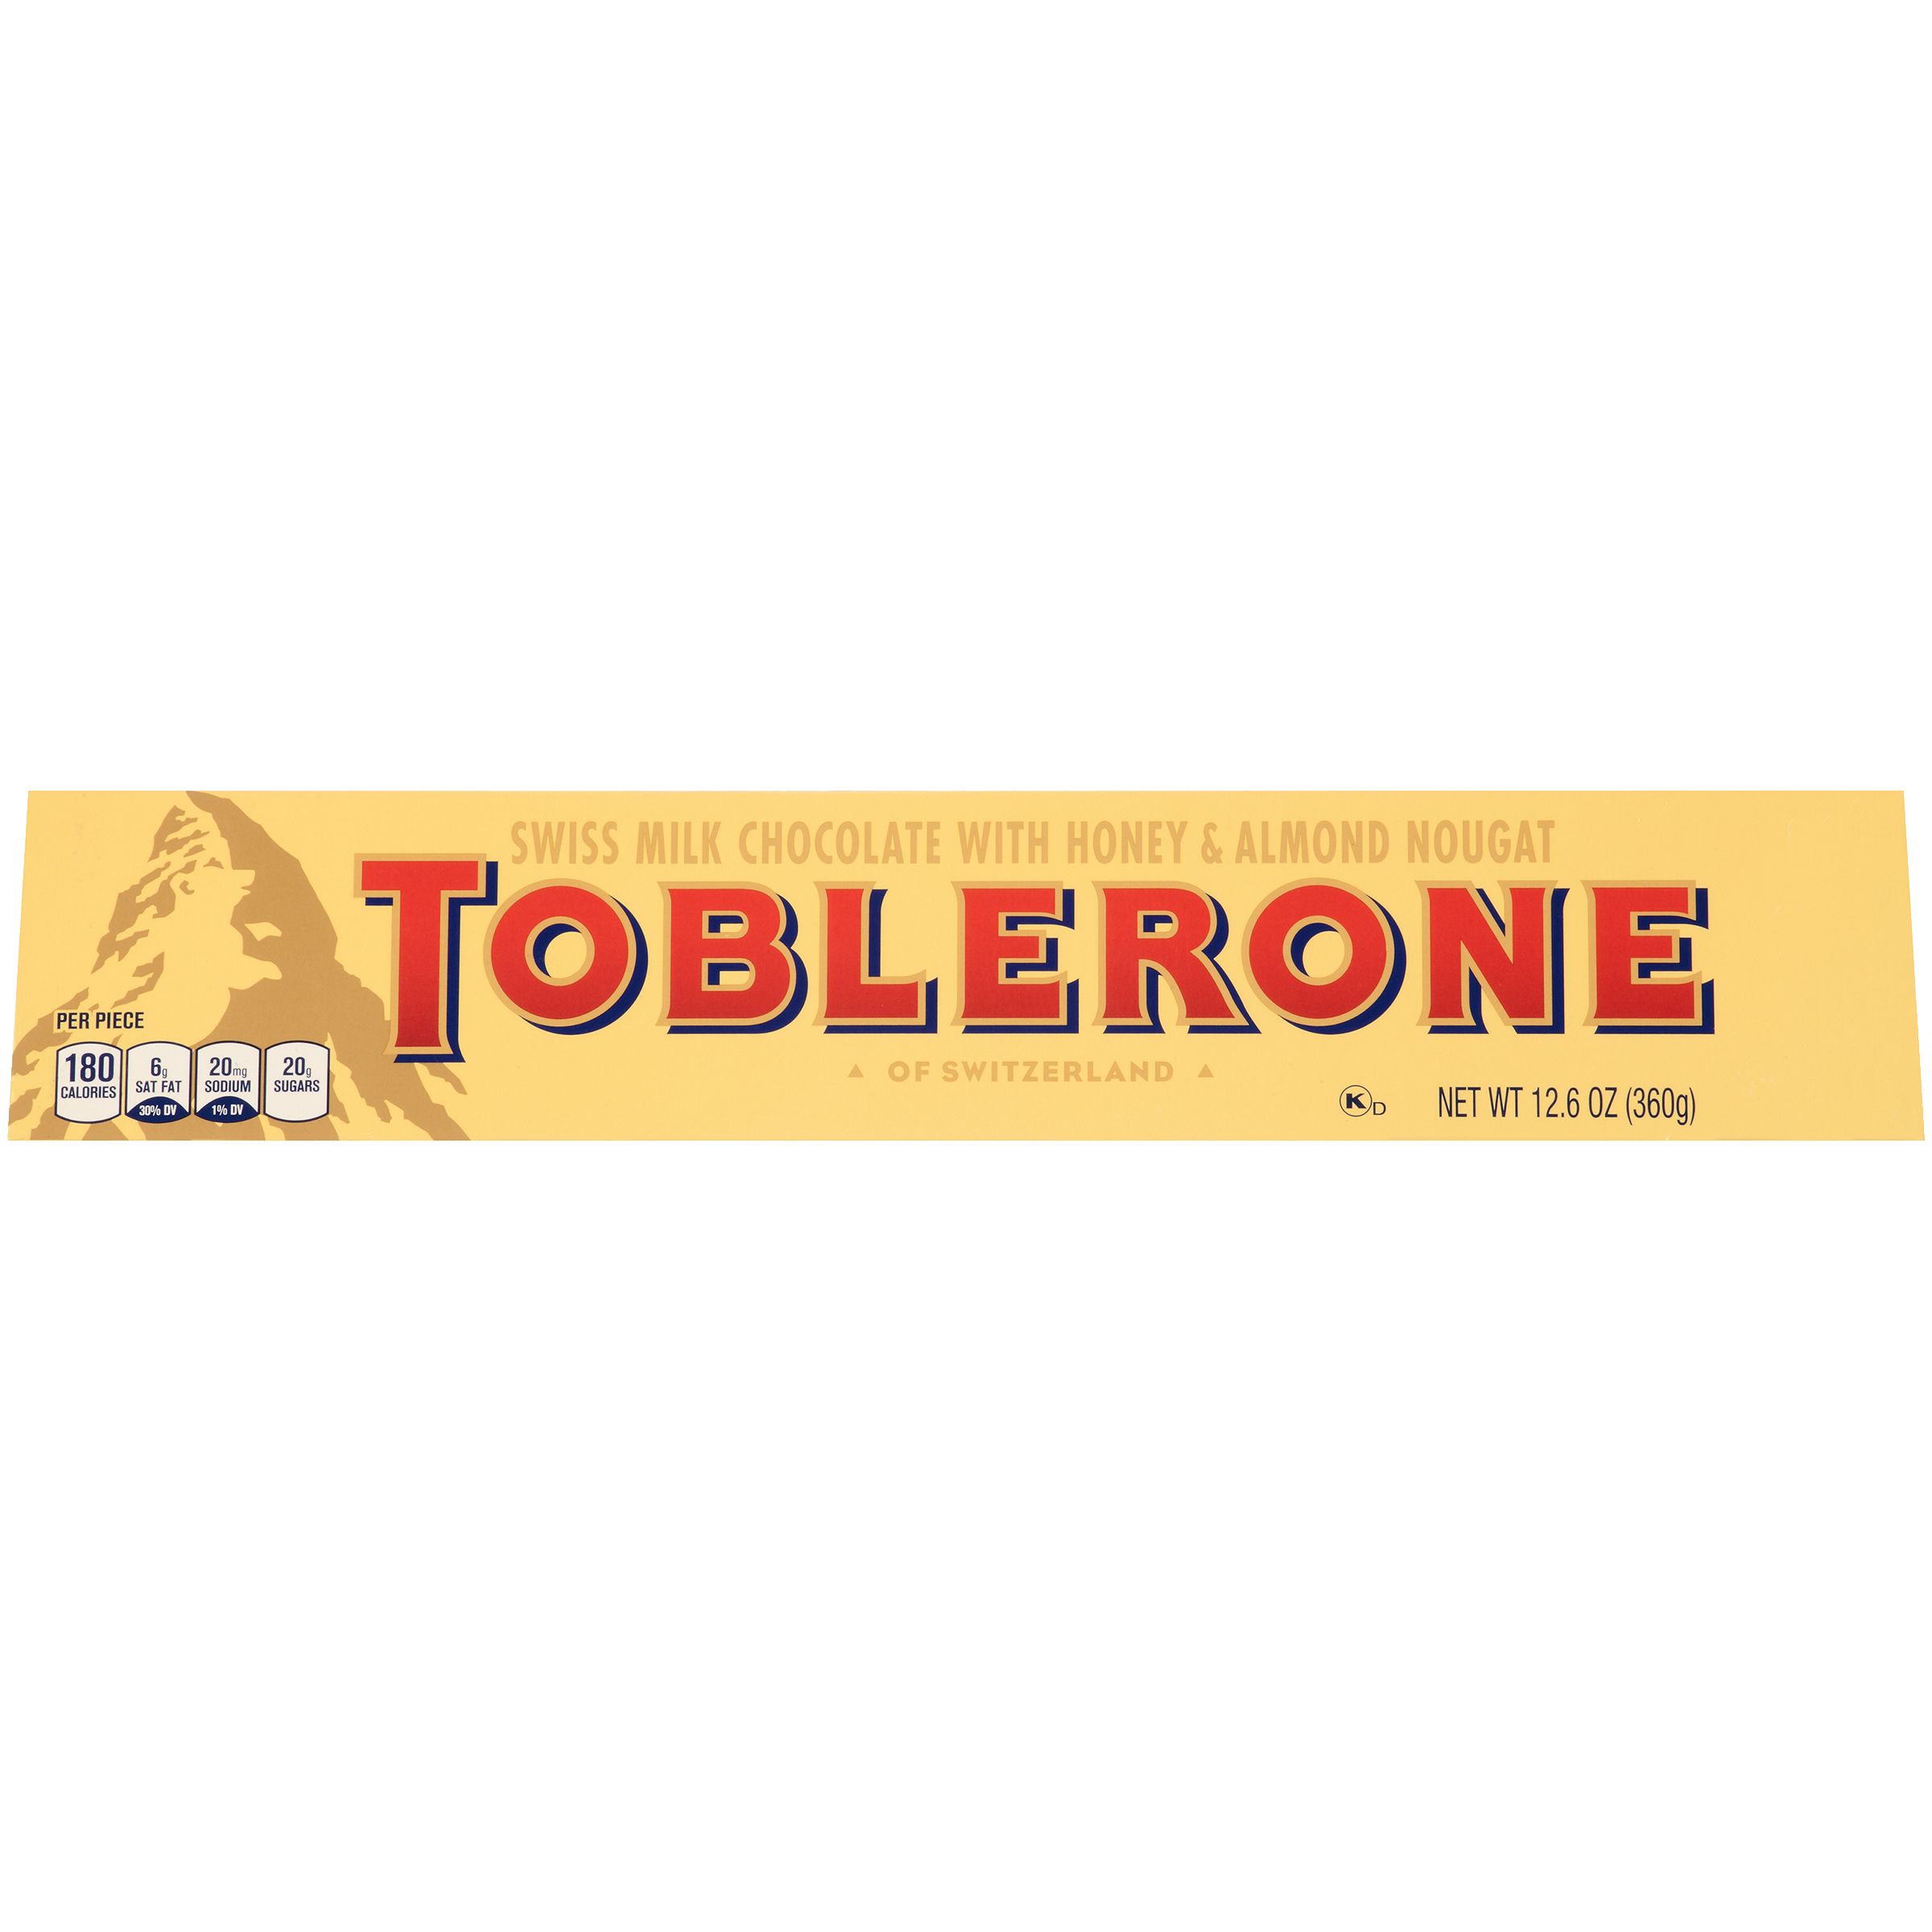 Toblerone Swiss Milk Chocolate Candy Bar with Honey and Almond Nougat, 12.6 oz